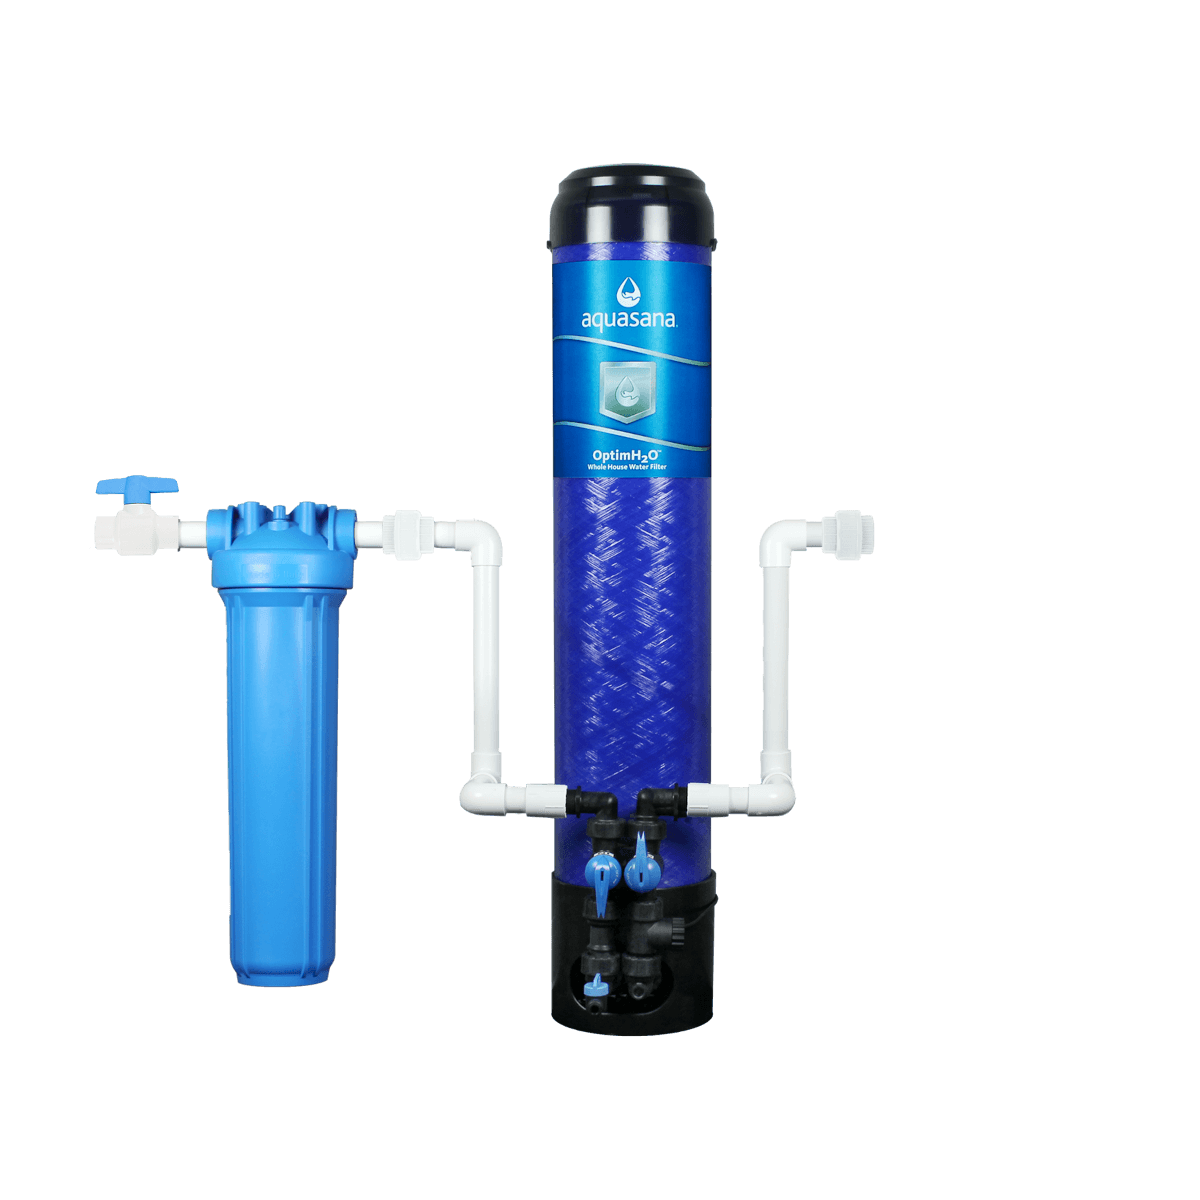 OptimH2O Whole House Water Filter System for Lead | Aquasana